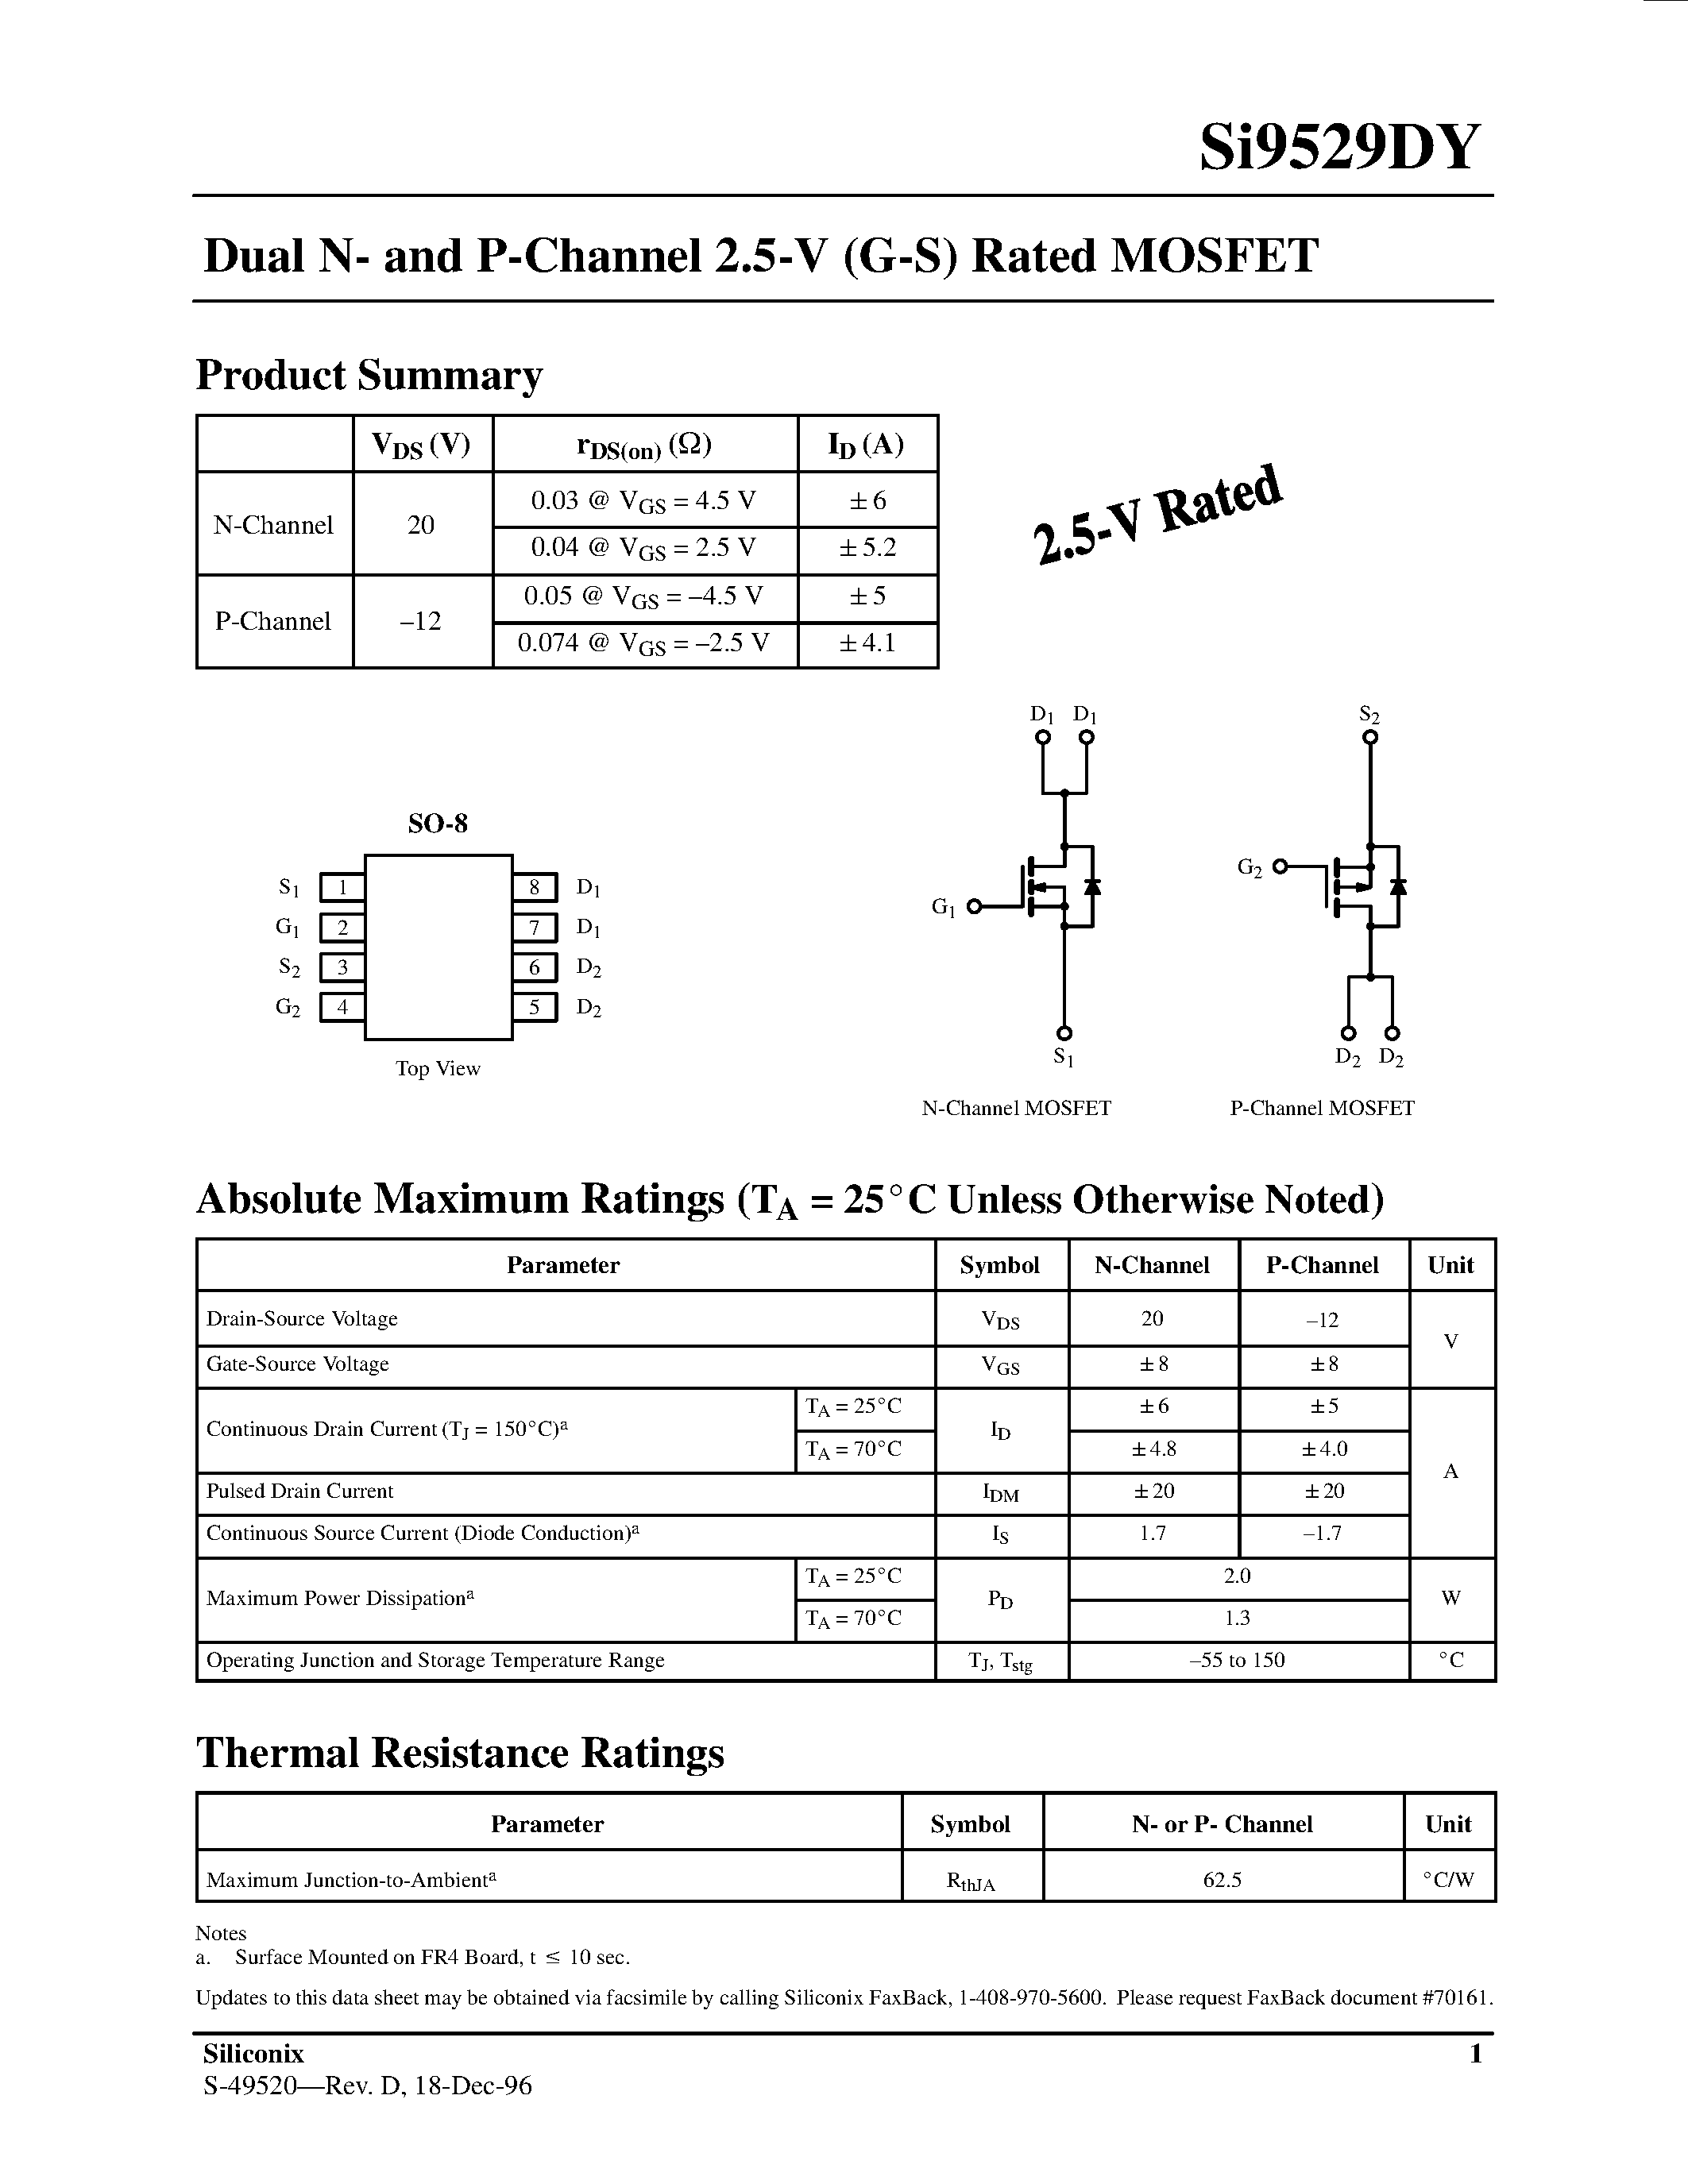 Datasheet SI9529DY - Dual N- and P-Channel 2.5-V (G-S) Rated MOSFET page 1